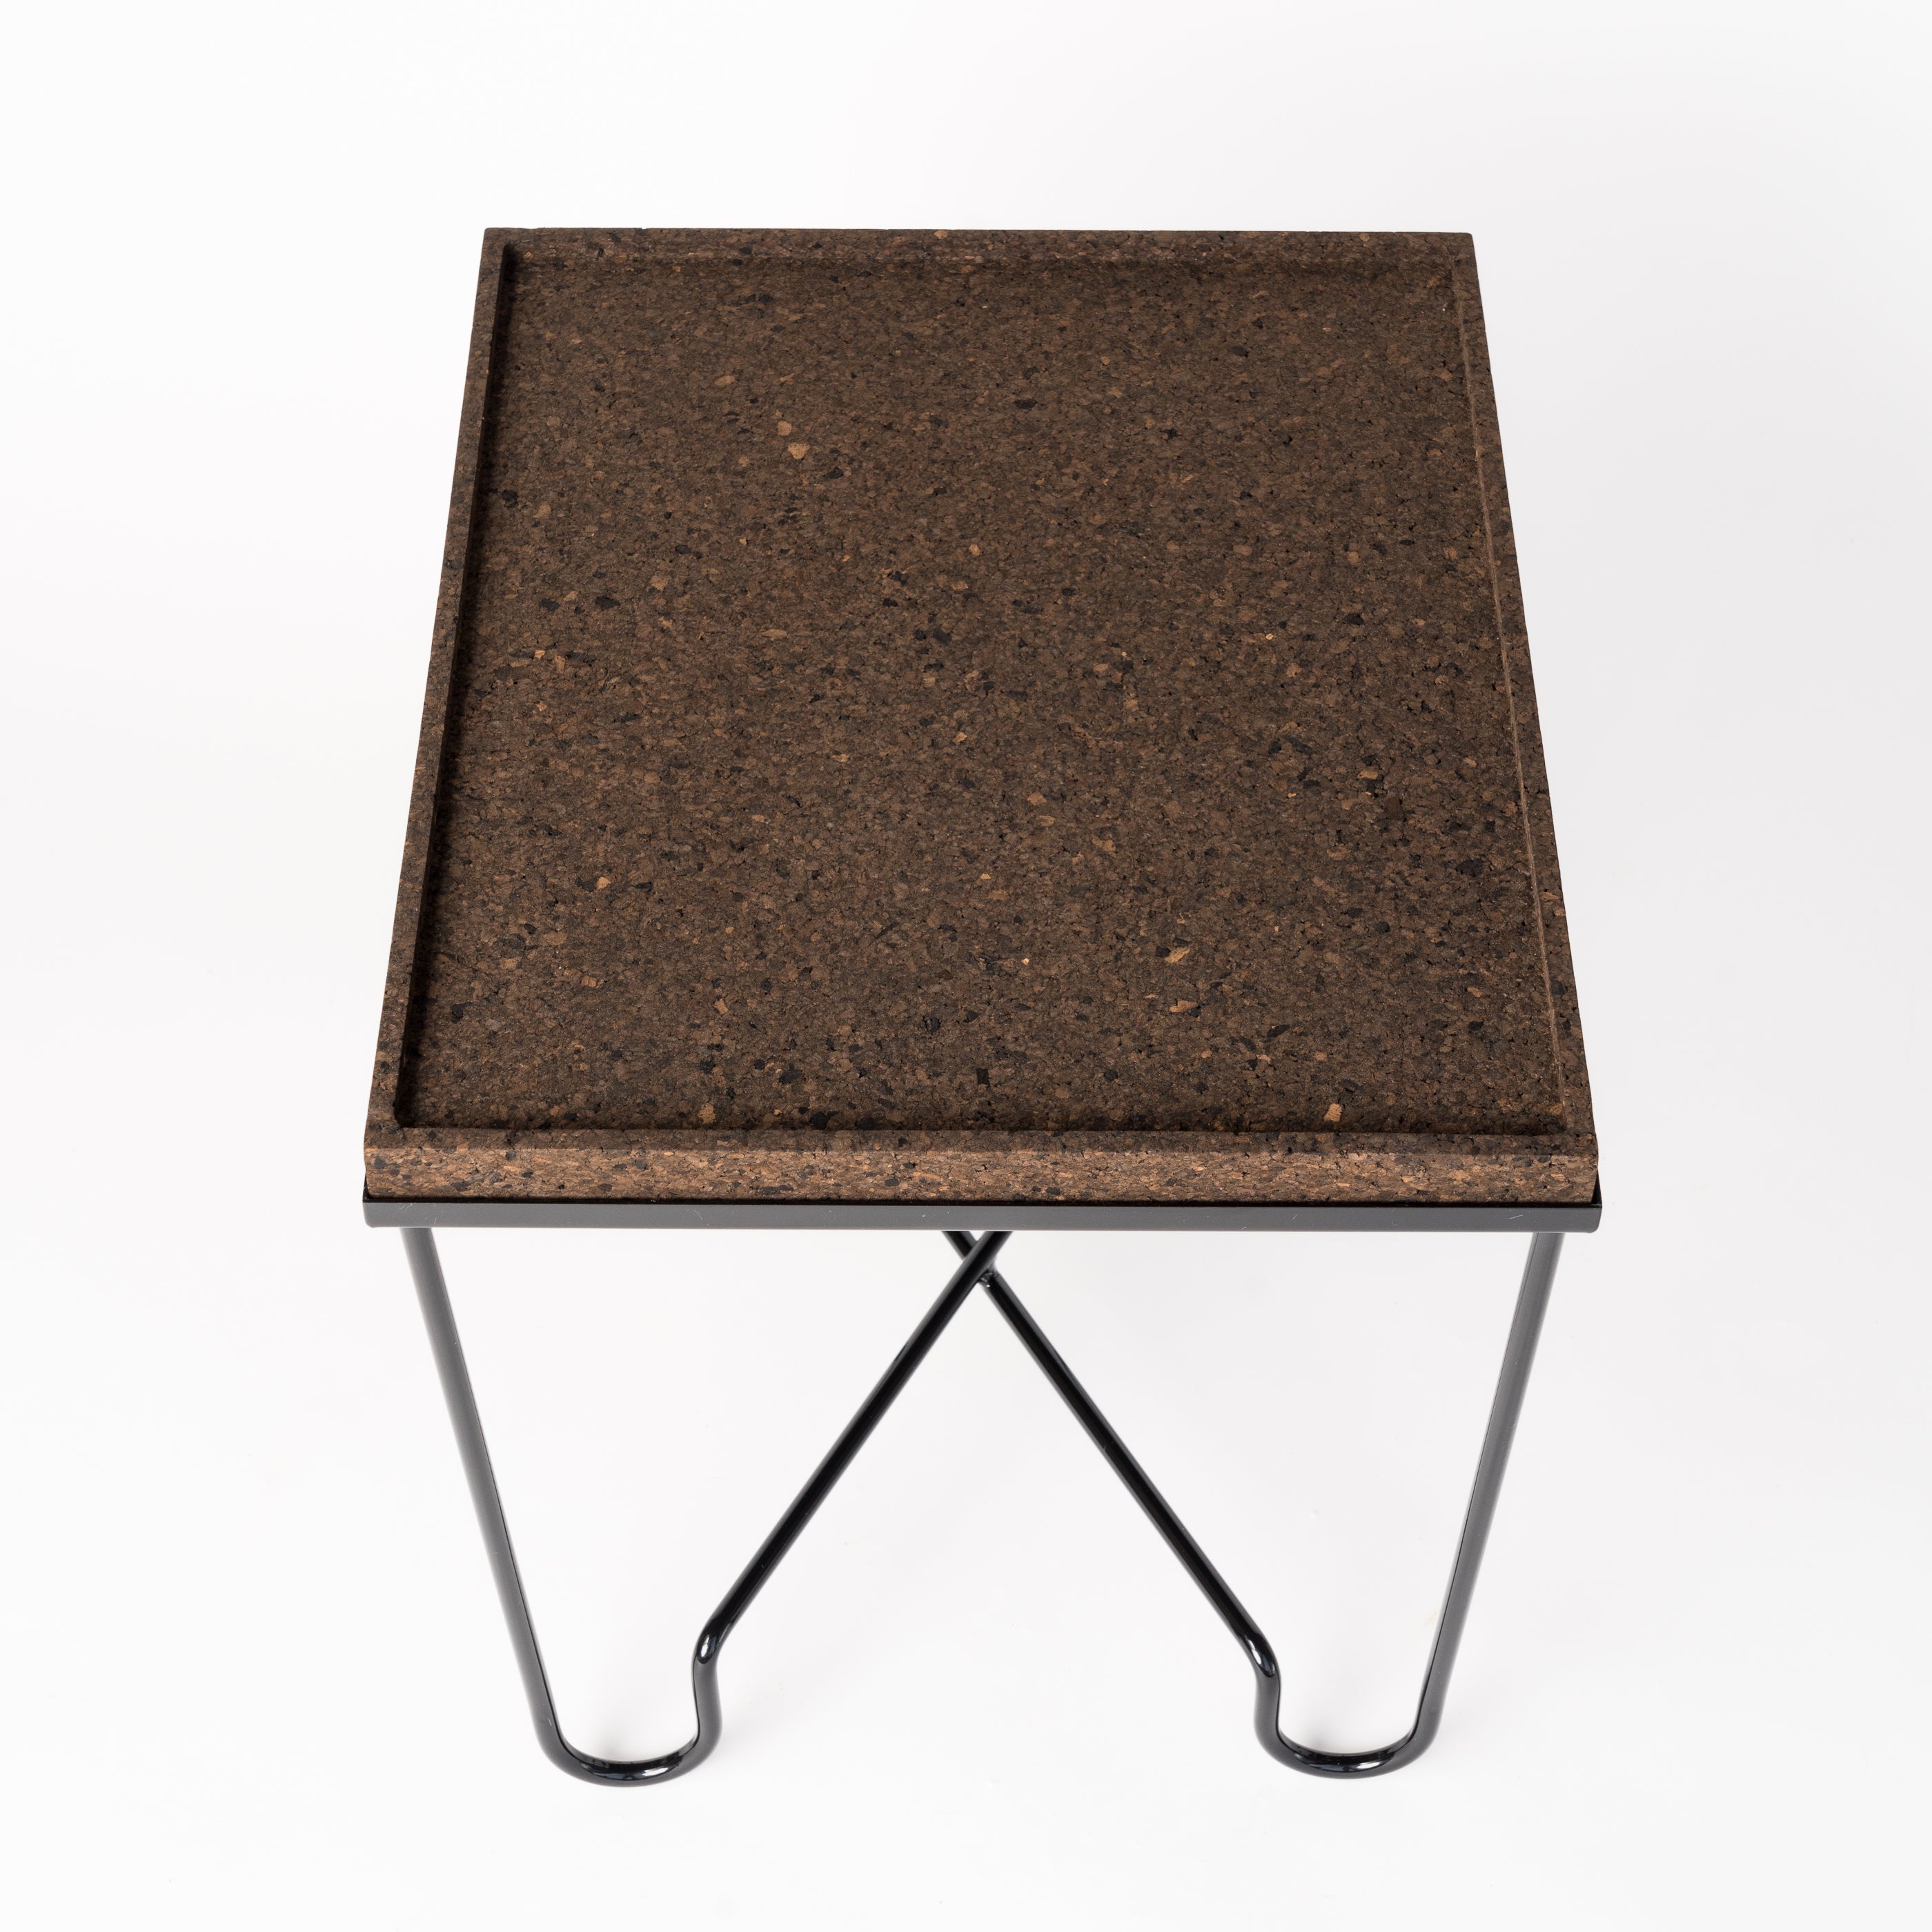 "Aronde" Black Lacquered Steel Side Table with Burnt Cork Top